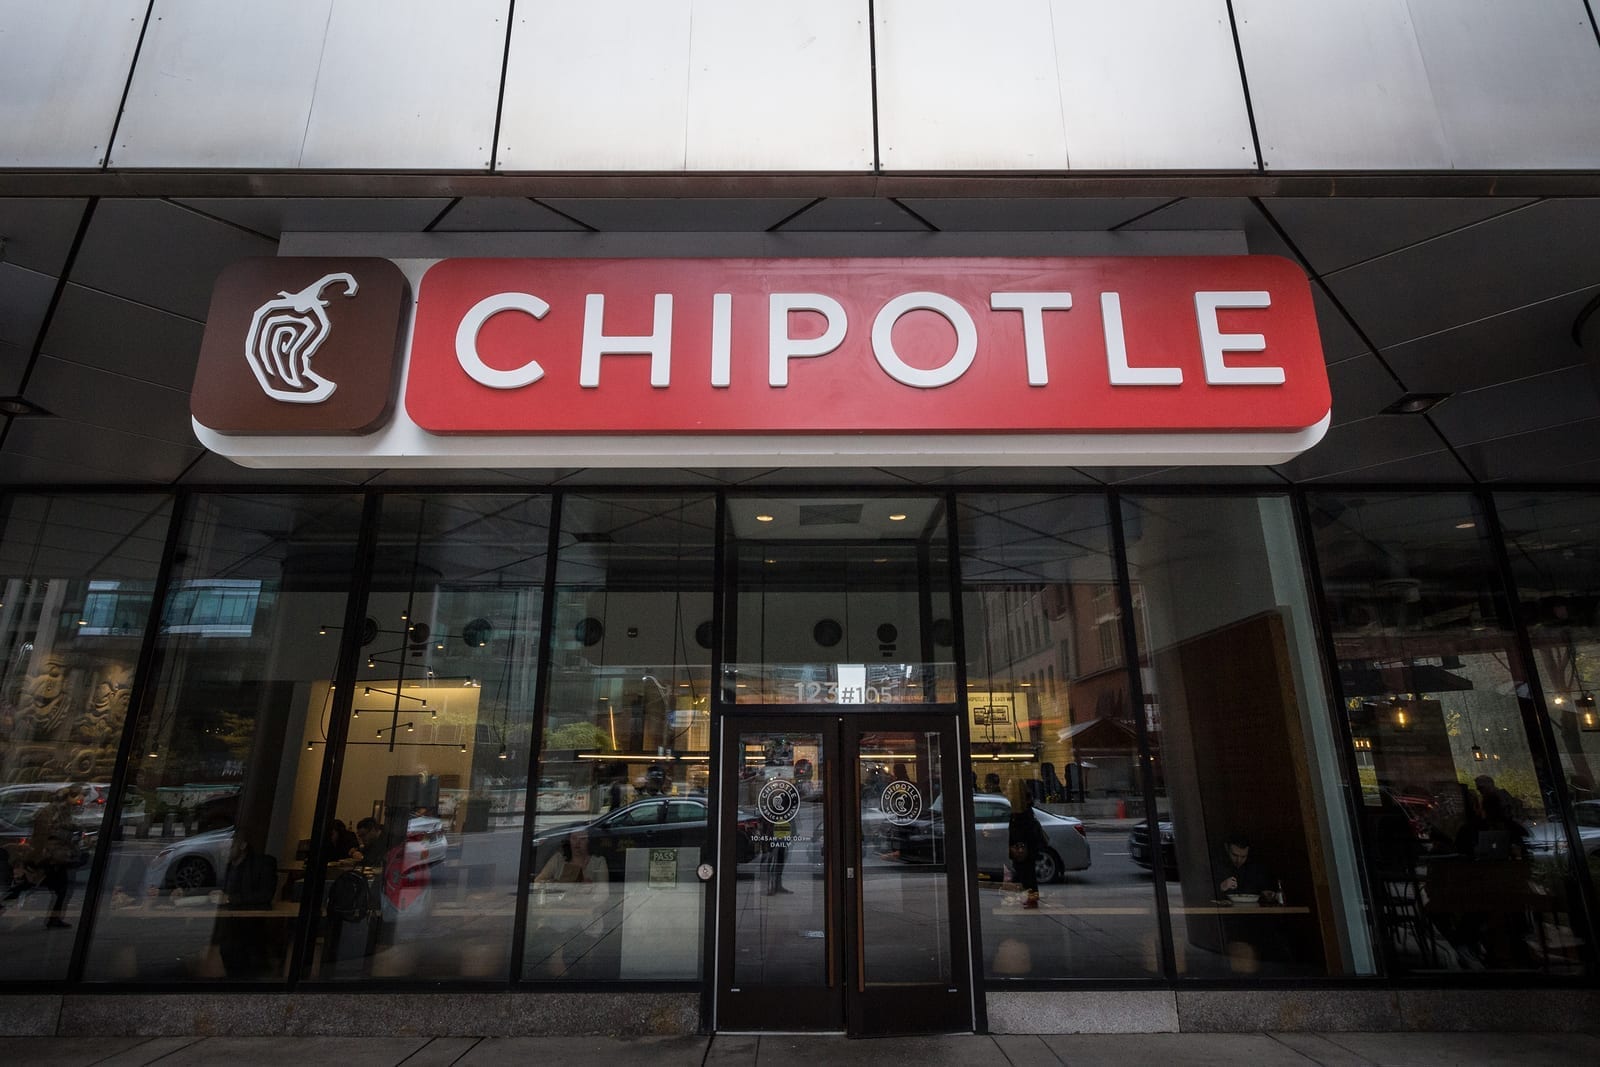 Chipotle to Pay $25 Million Fine for Food Safety Violations